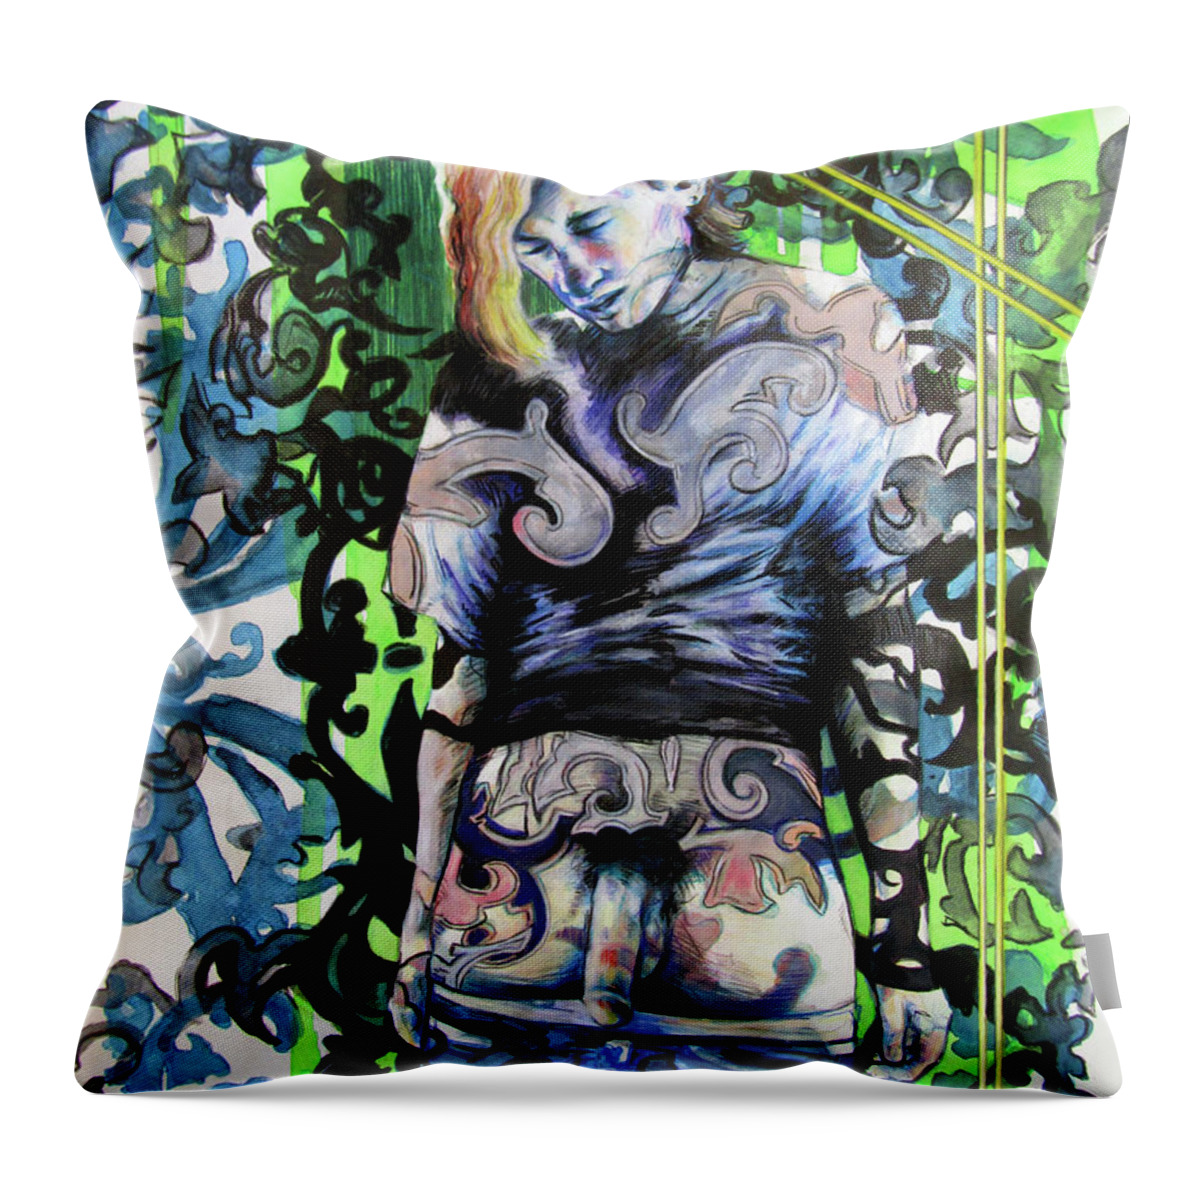 Blonde Boy Throw Pillow featuring the painting The Blond Bomber by Rene Capone